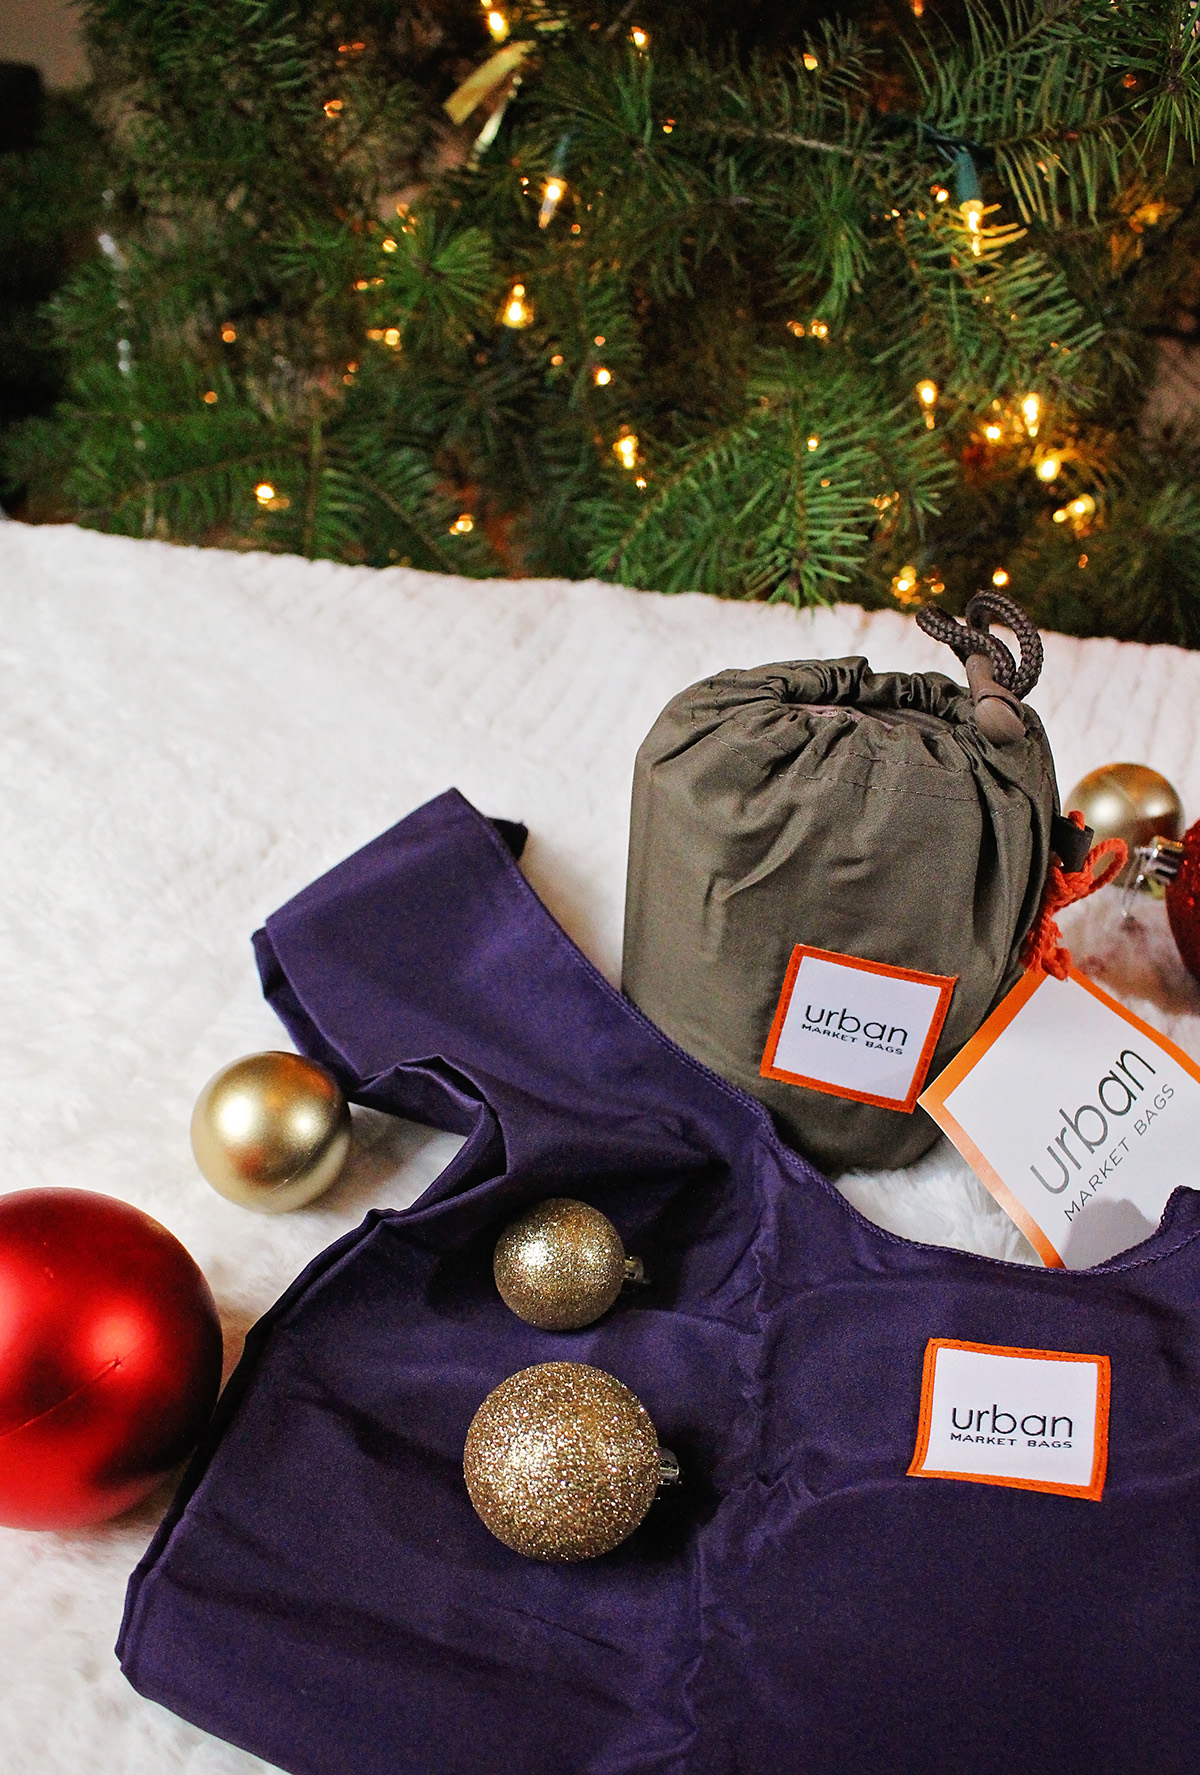 Urban Market Bags - 2016 Gift Guide (sponsored) A Well Crafted Party